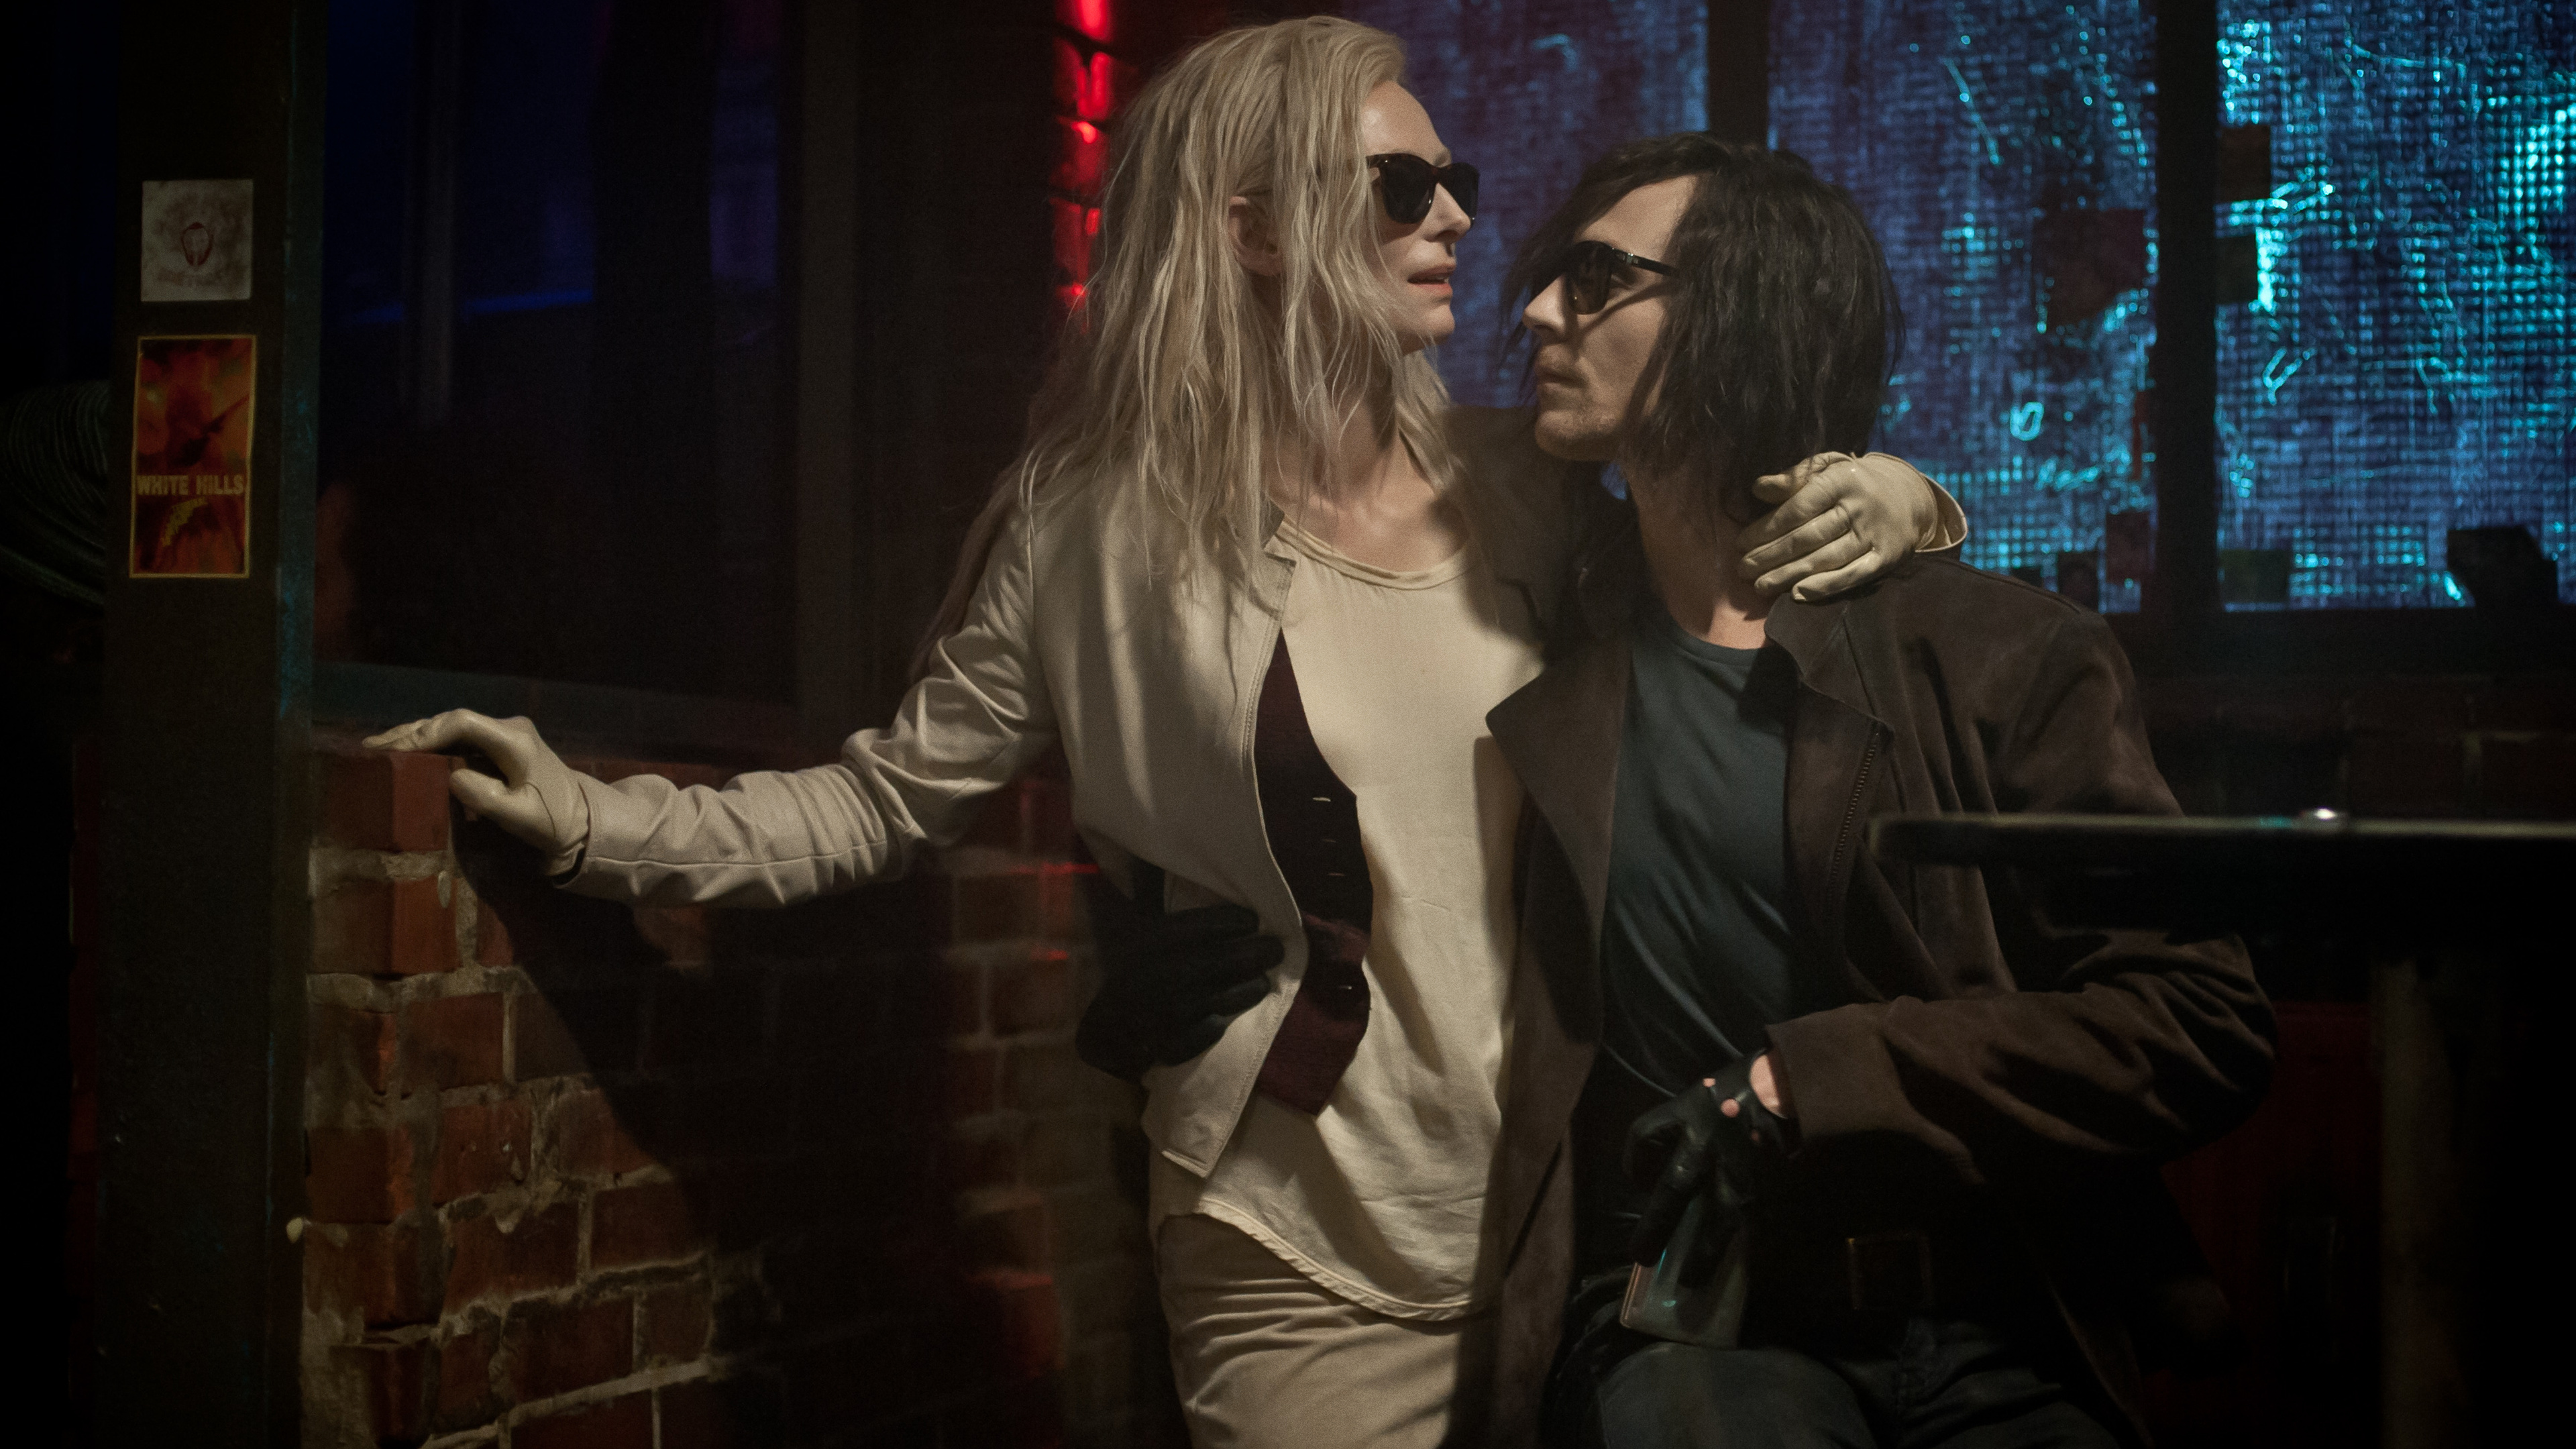 Only Lovers Left Alive, Mysterious romance, Unconventional love story, Haunting visuals, 3840x2160 4K Desktop